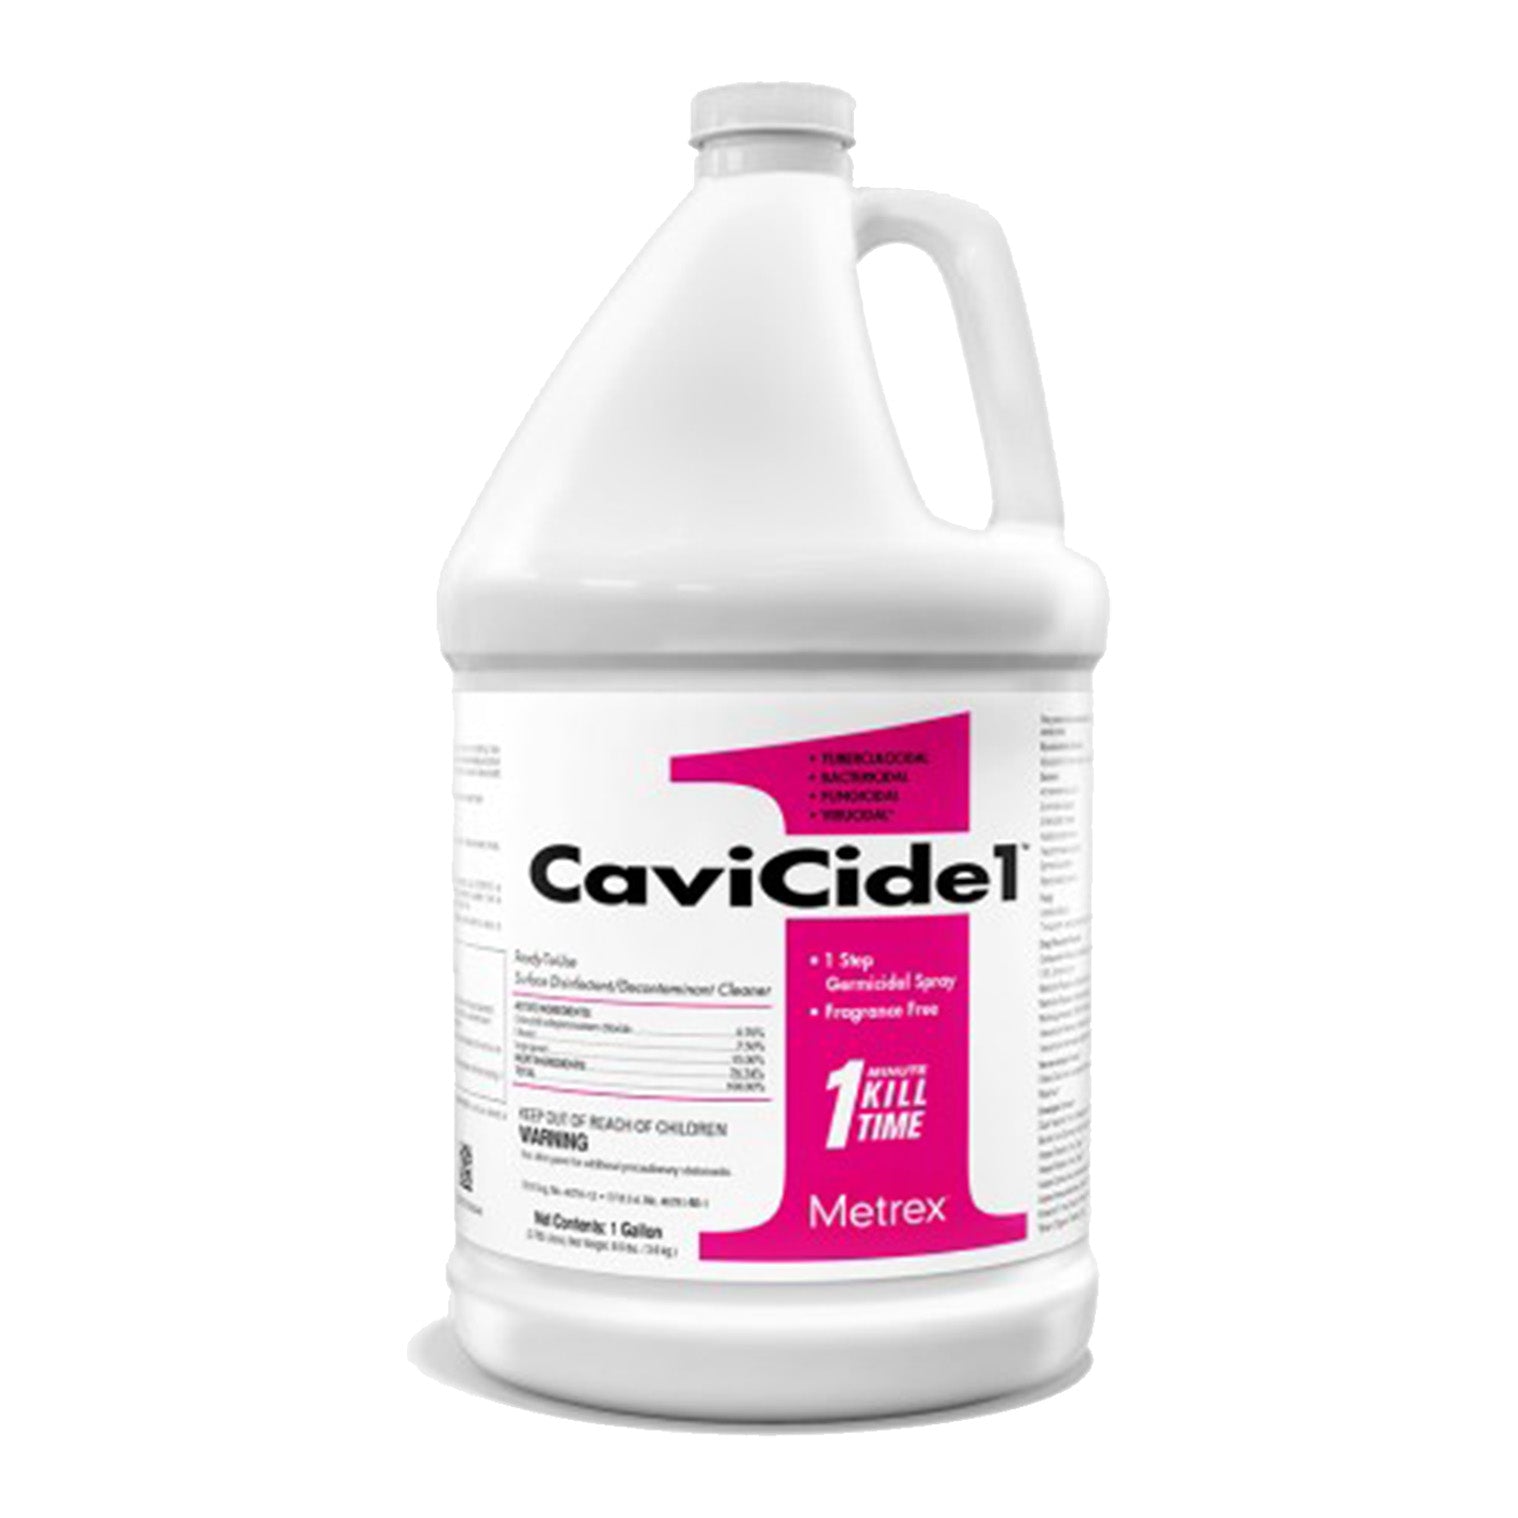 Cavicide Surface Disinfectants